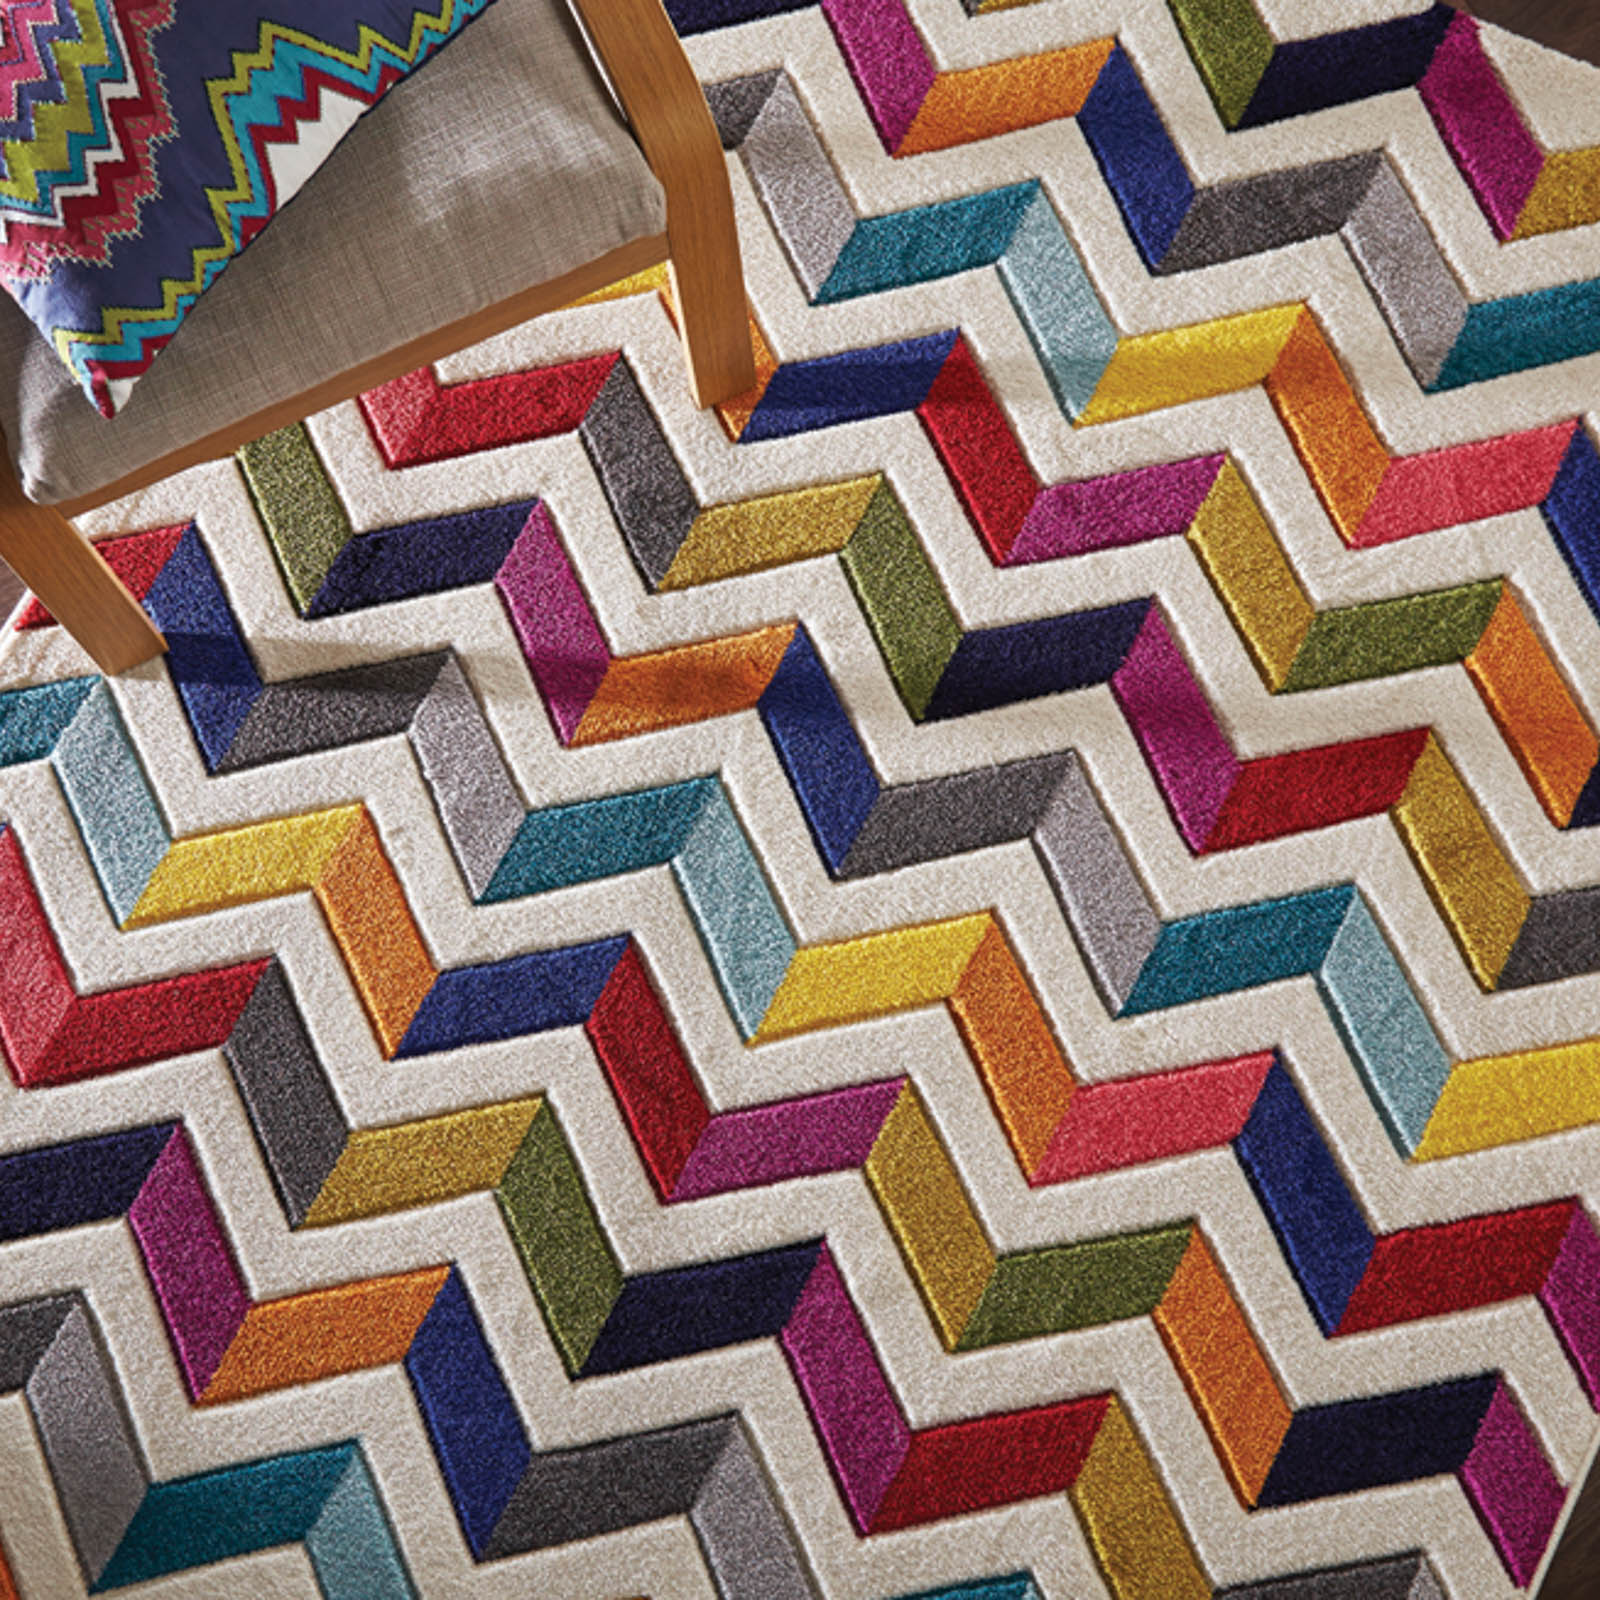 Spectrum zigzag and multicoloured rug part of a joint competition